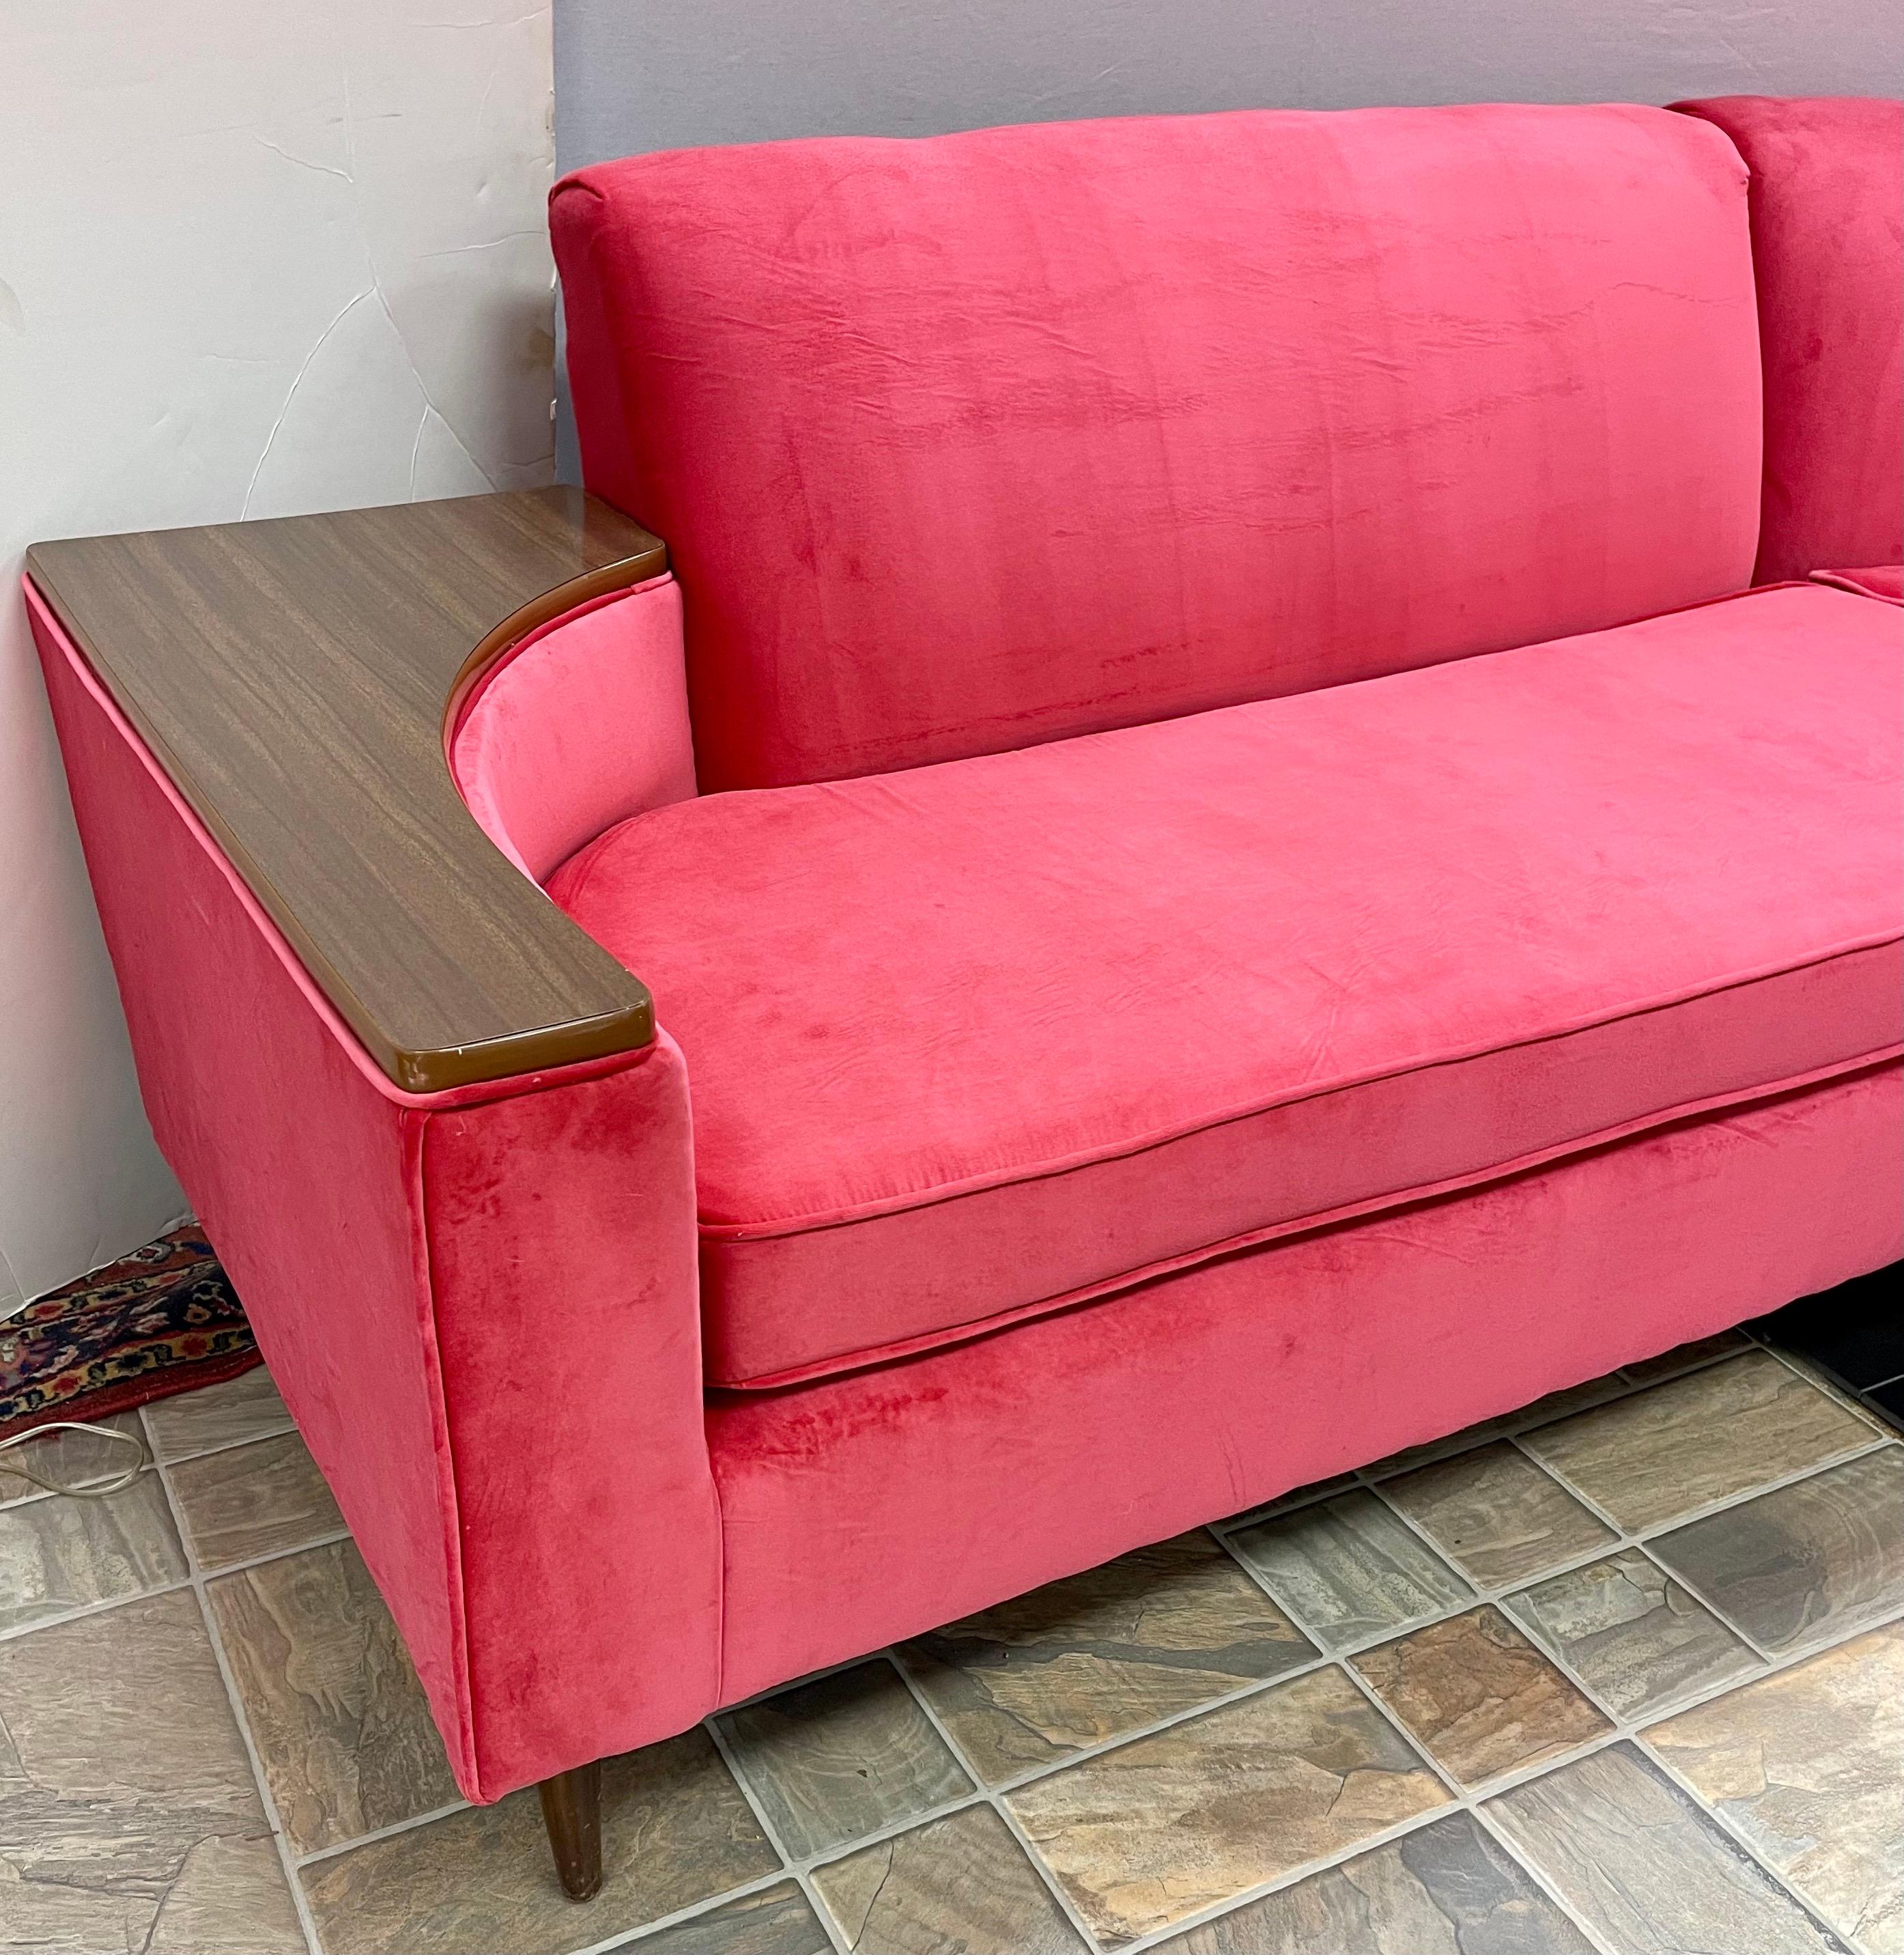 refurbished sectional couch